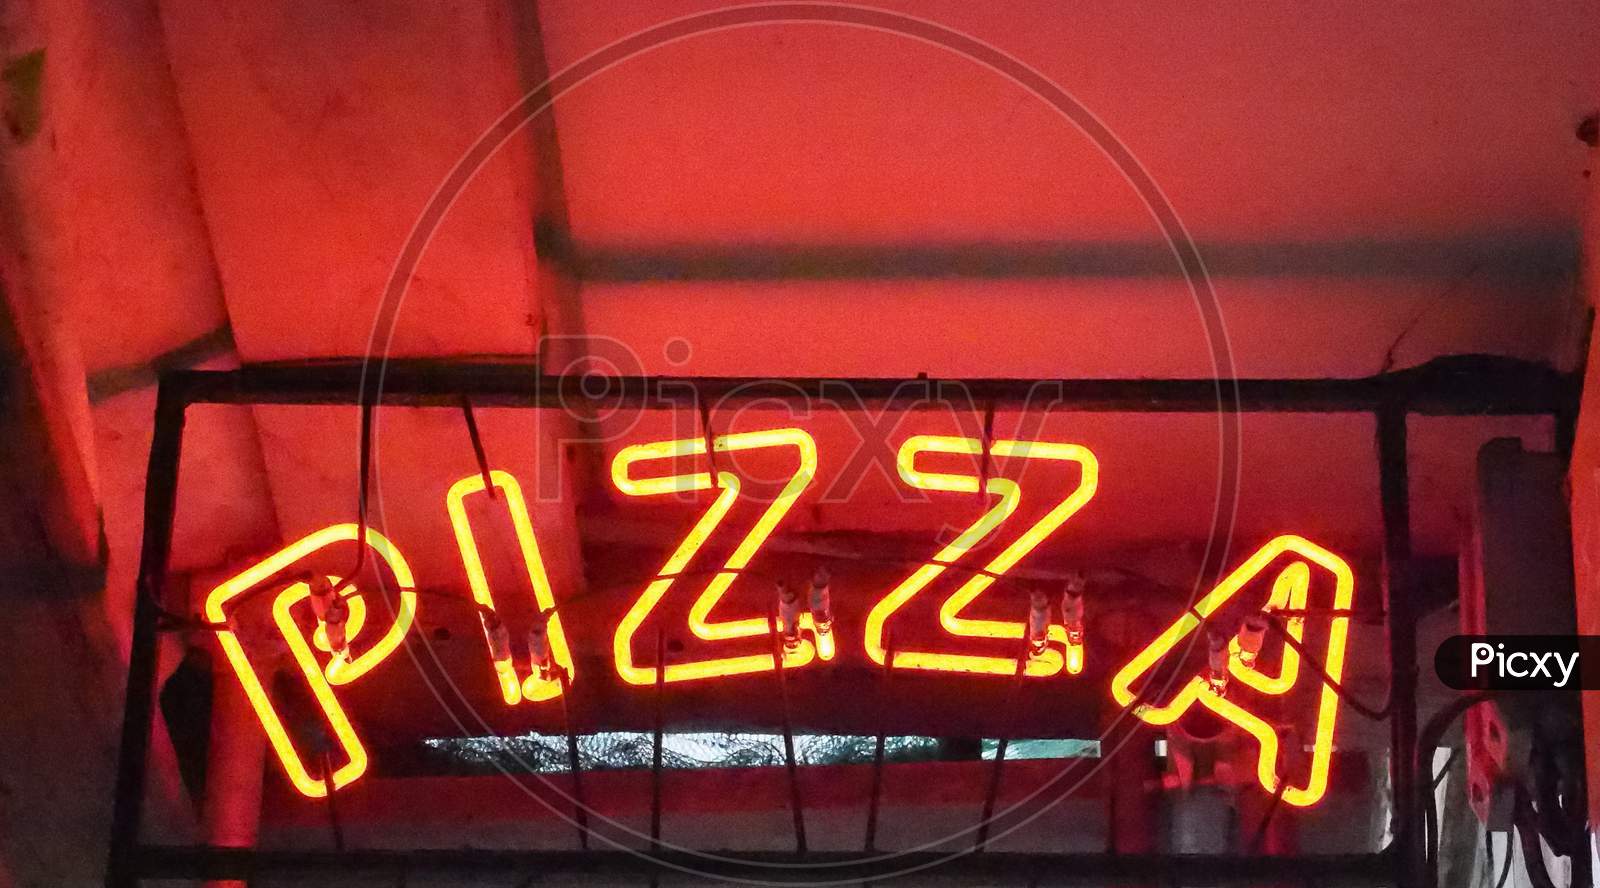 Red Neon Pizza Sign